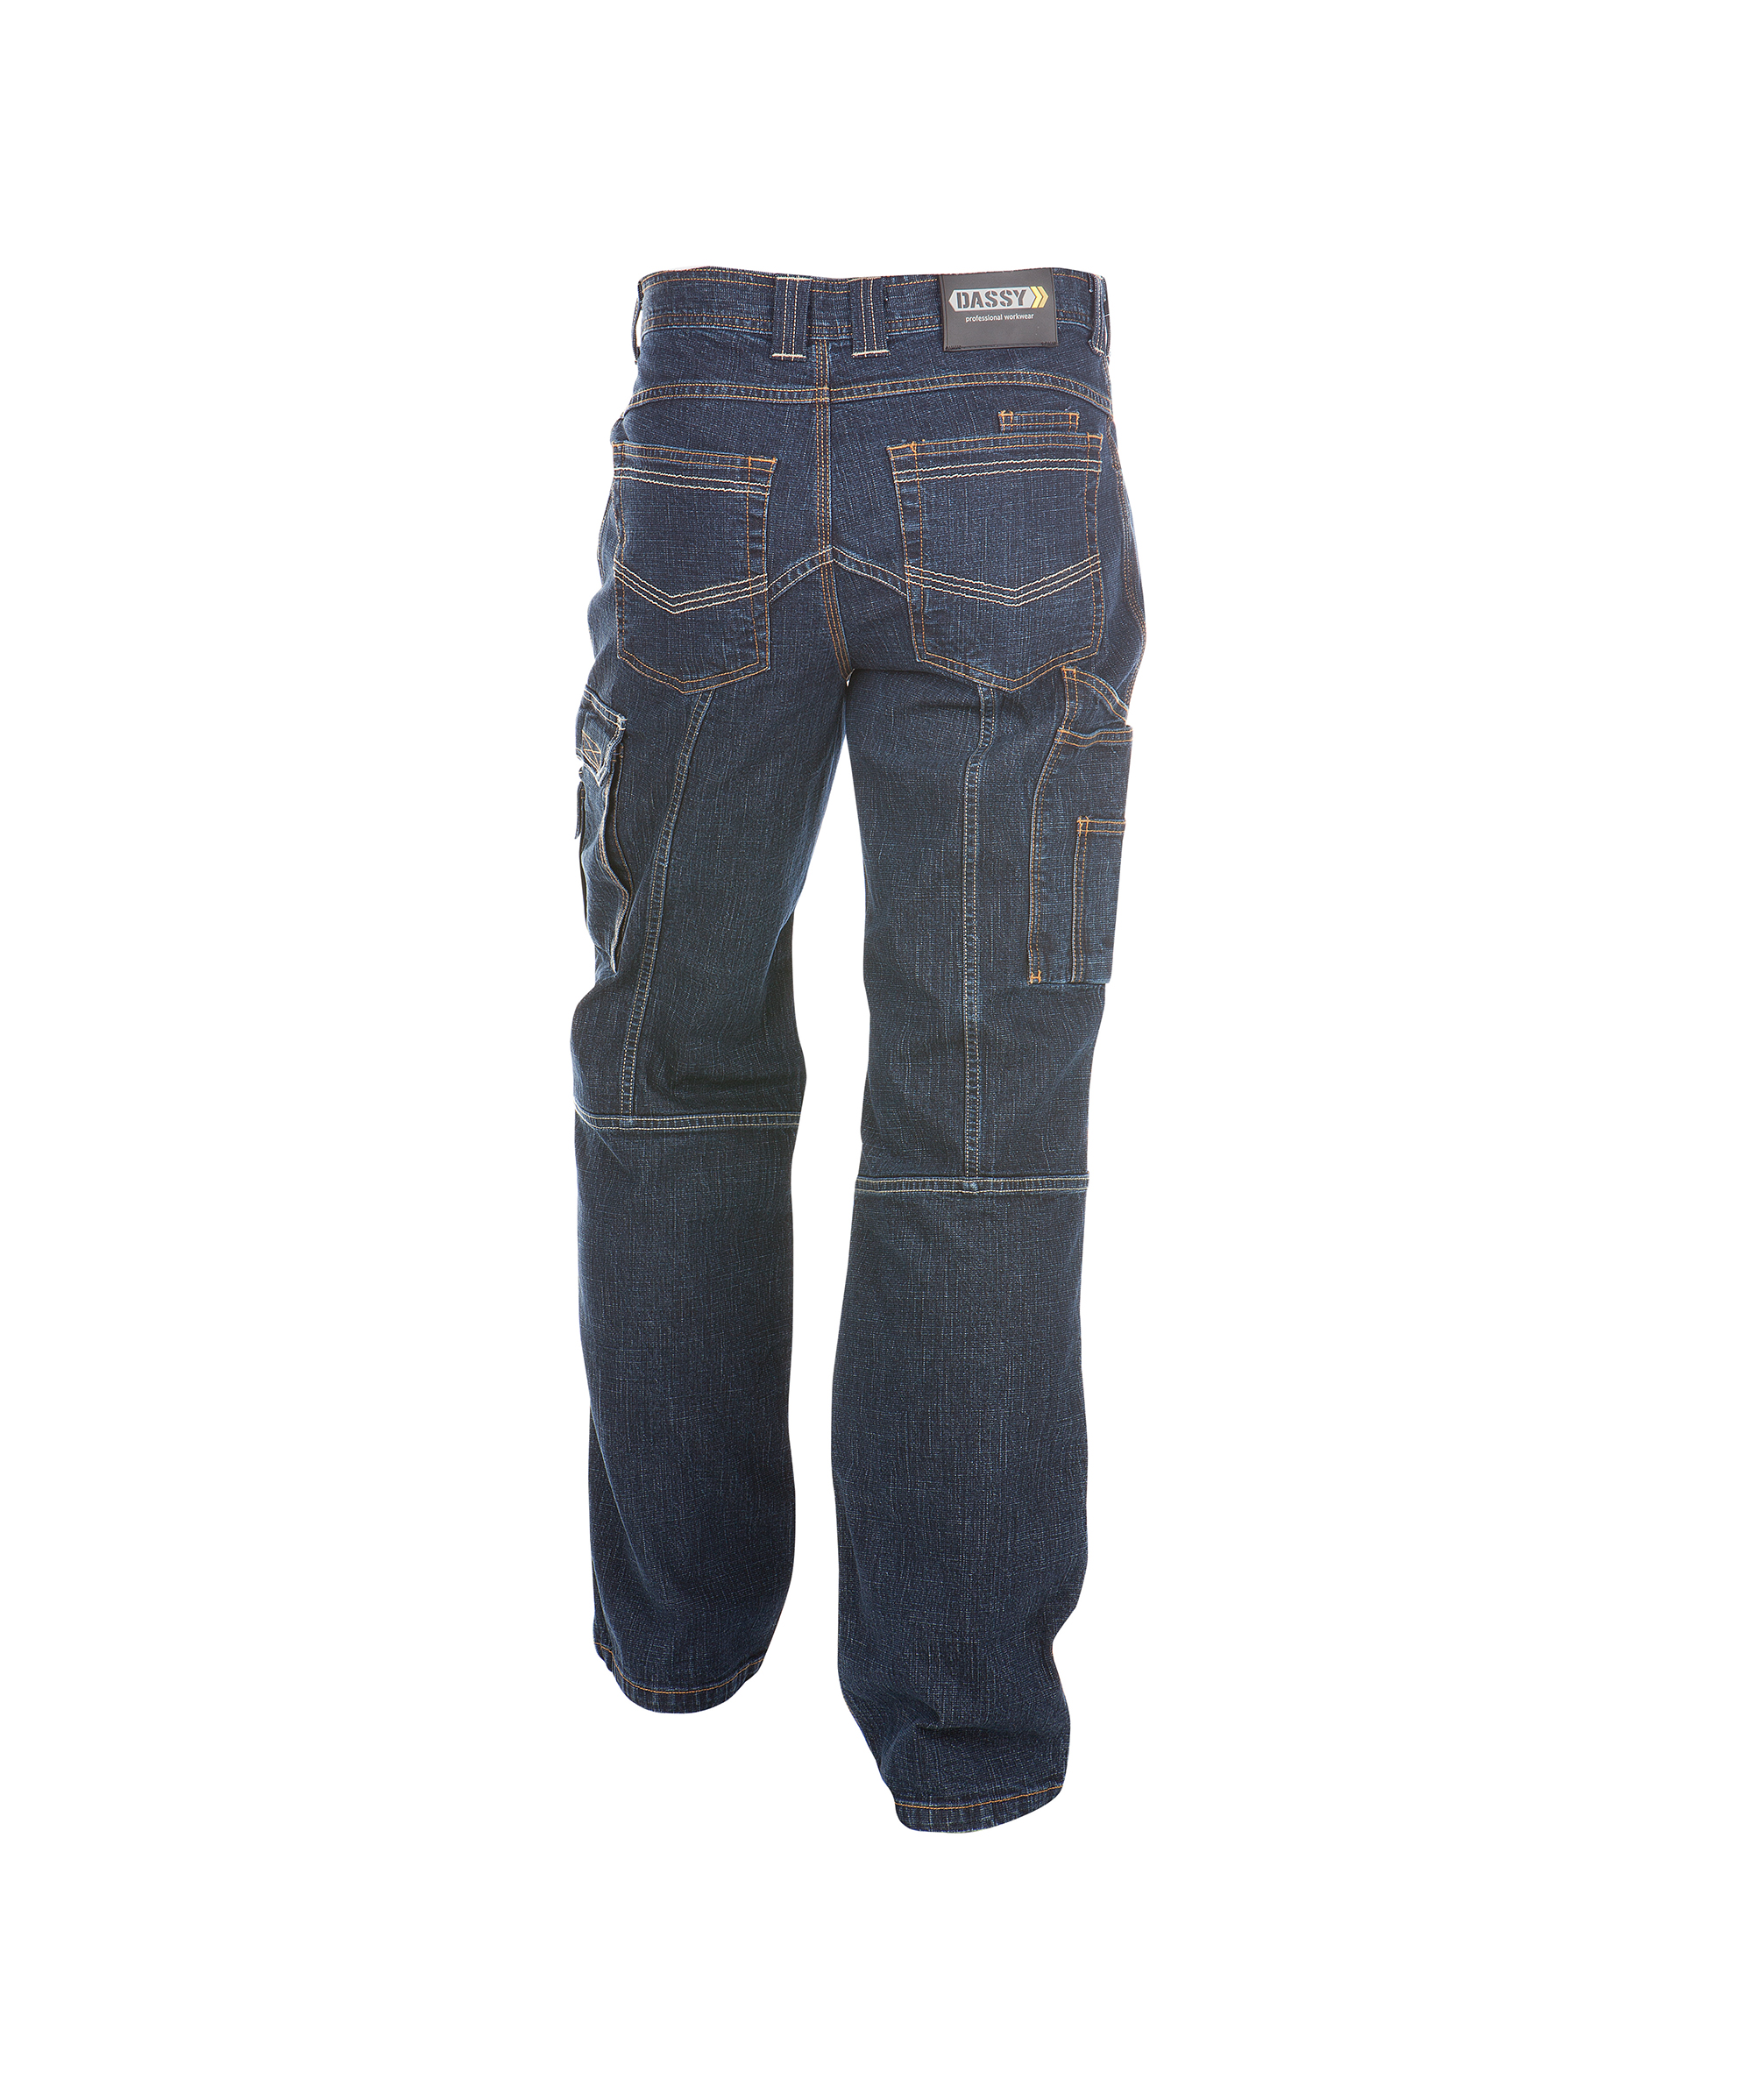 knoxville_stretch-jeans-work-trousers-with-knee-pockets_jeans-blue_back.jpg